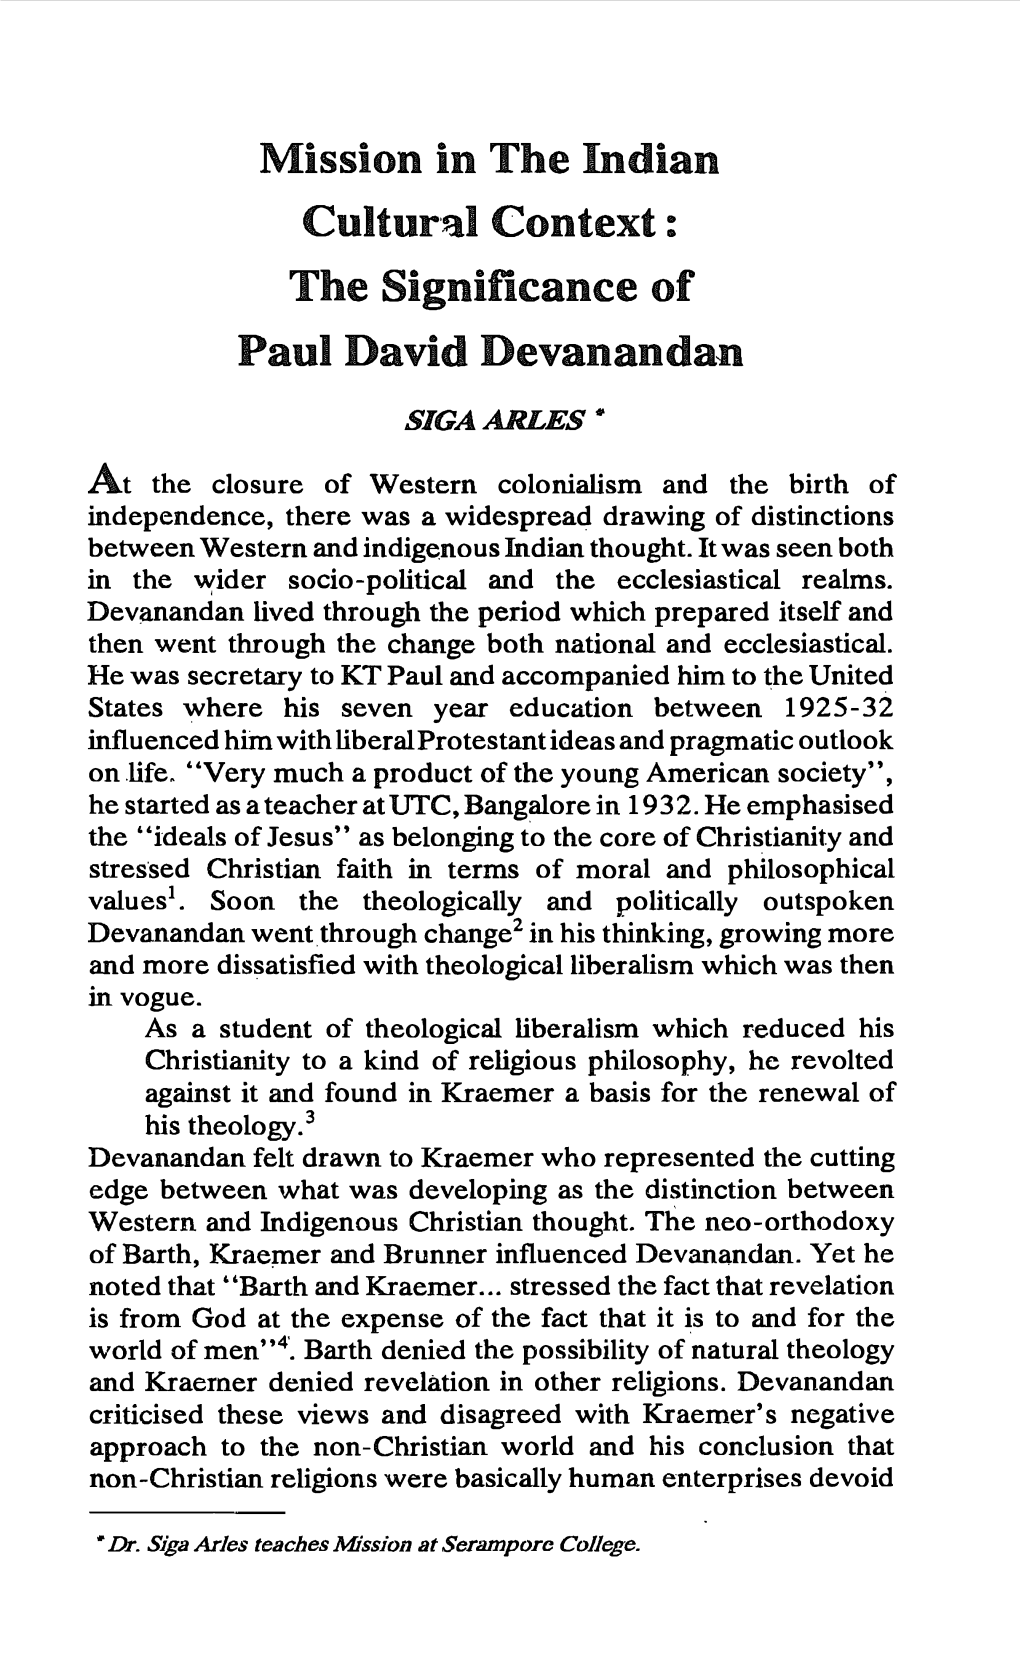 Mission in the Indian Cultural Context: the Significance of Paul David